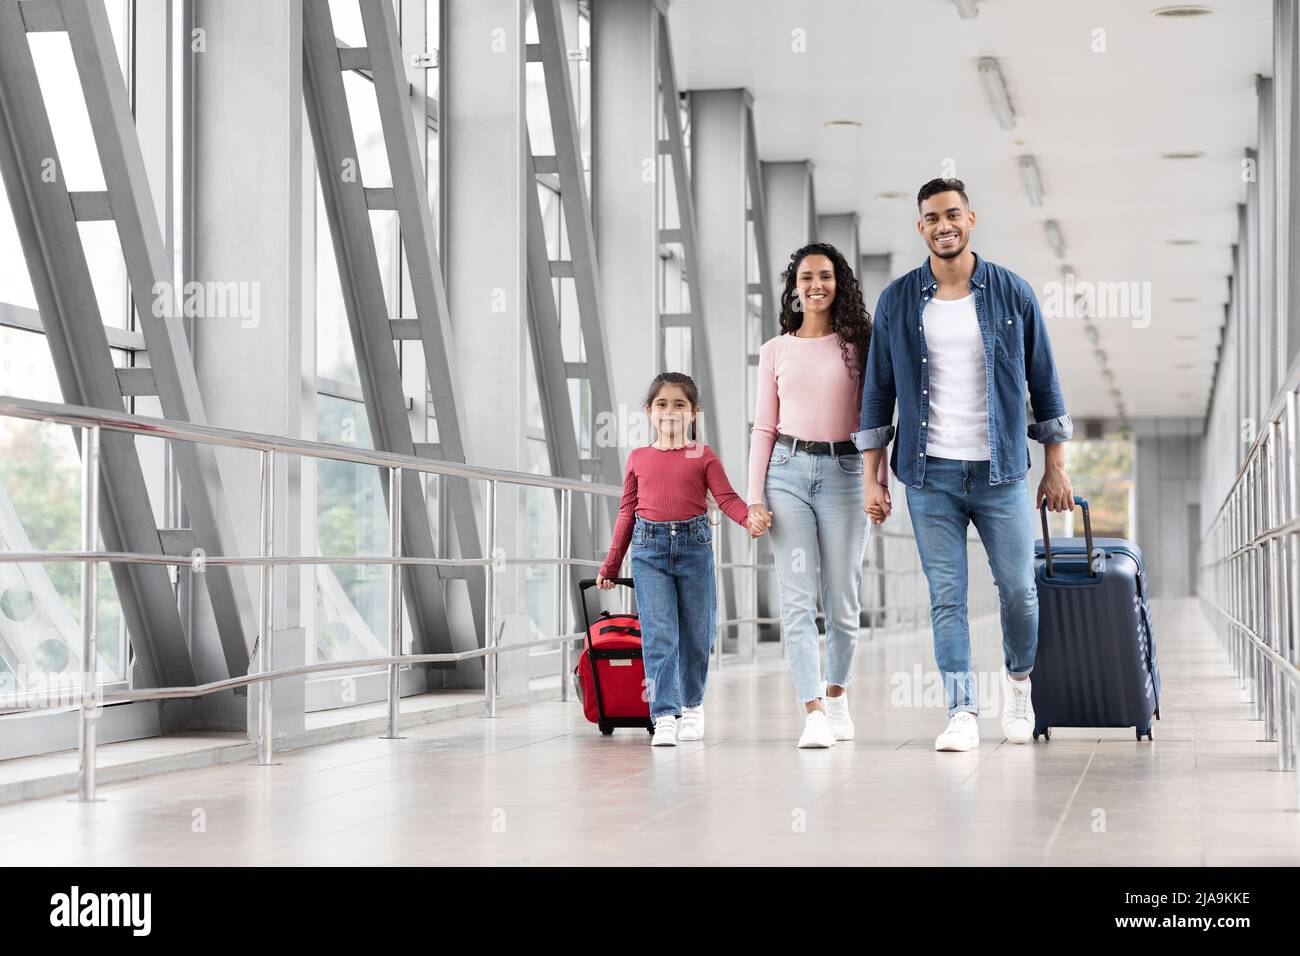 Travel Insurance. Smiling Arabic Family With Daughter Walking With Suitcases At Airport Stock Photo